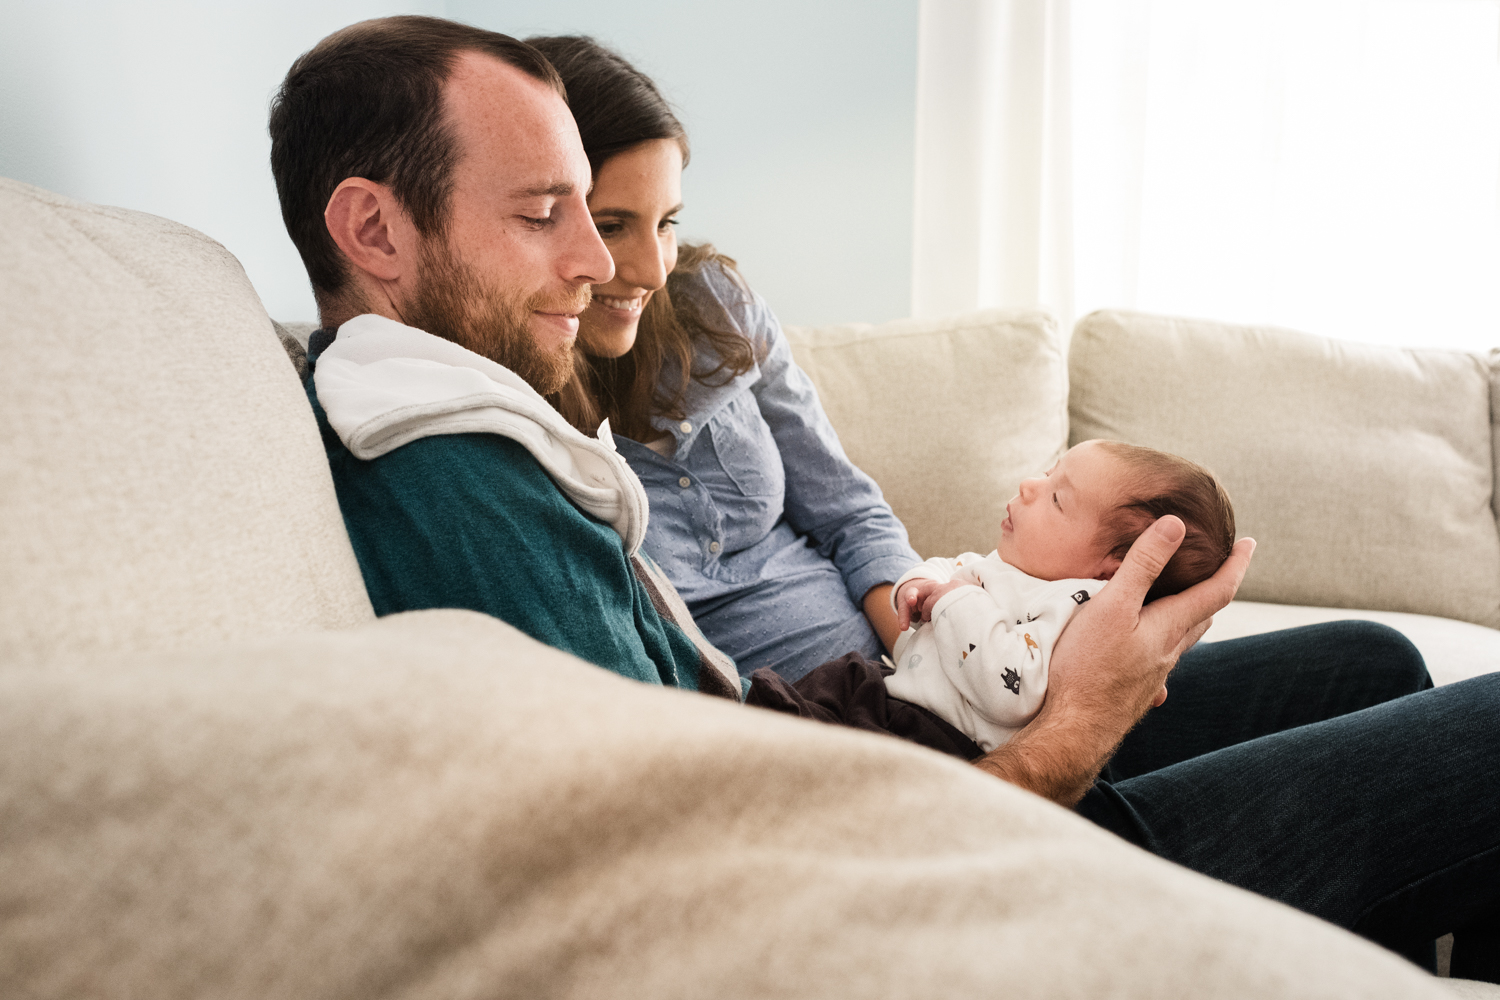 new parents admire their infant daughter while seated together on family sofa